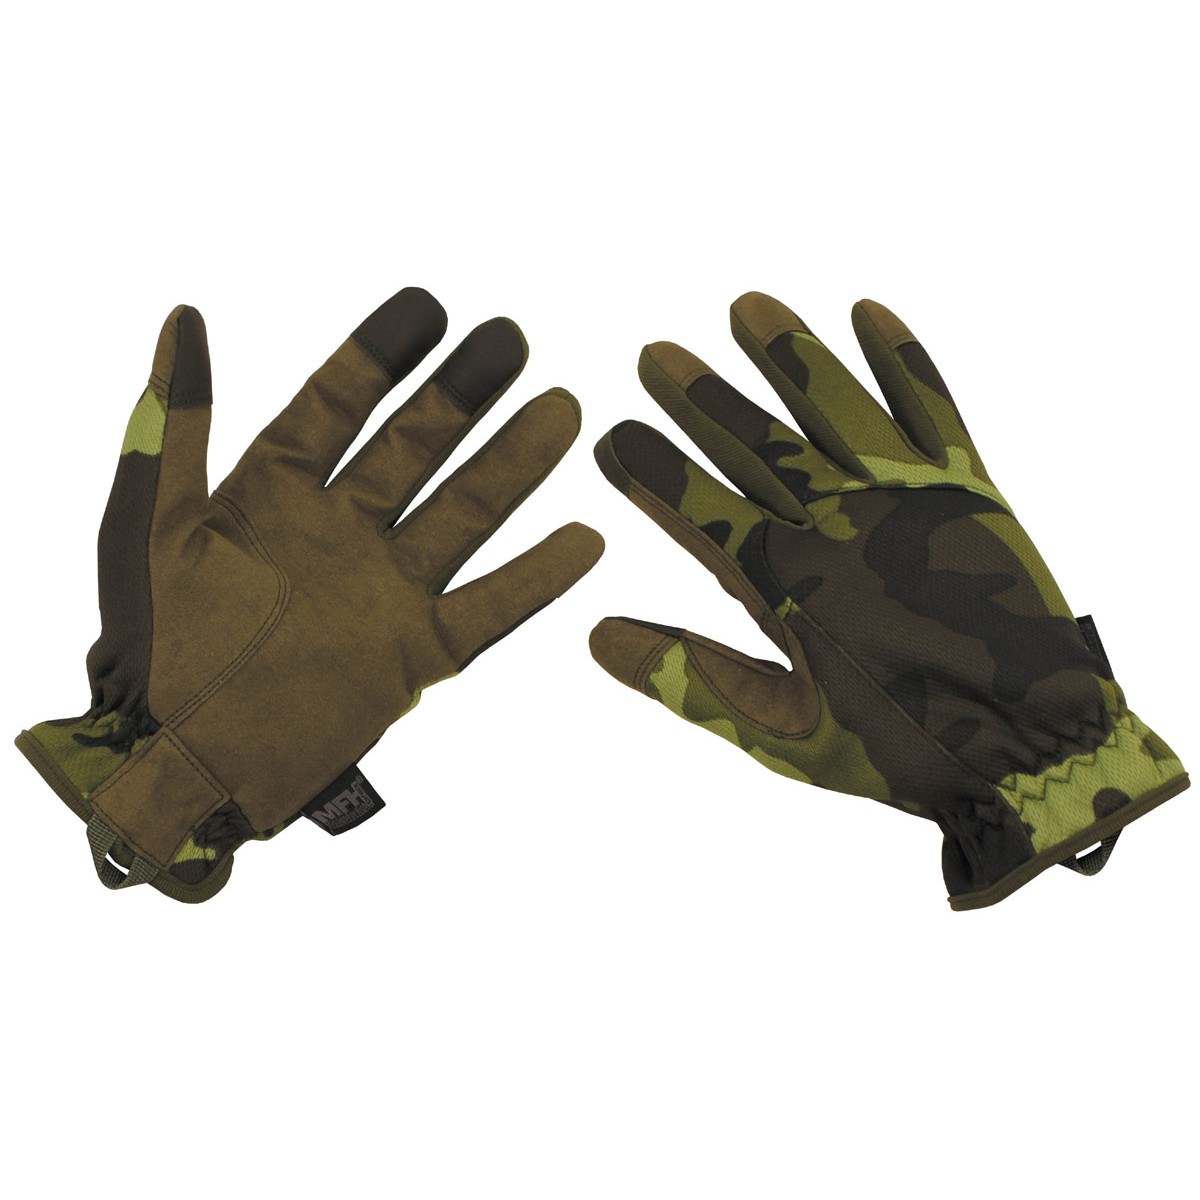 Professional Lightweight Tactical Military Gloves M95 Czech Army Camo 